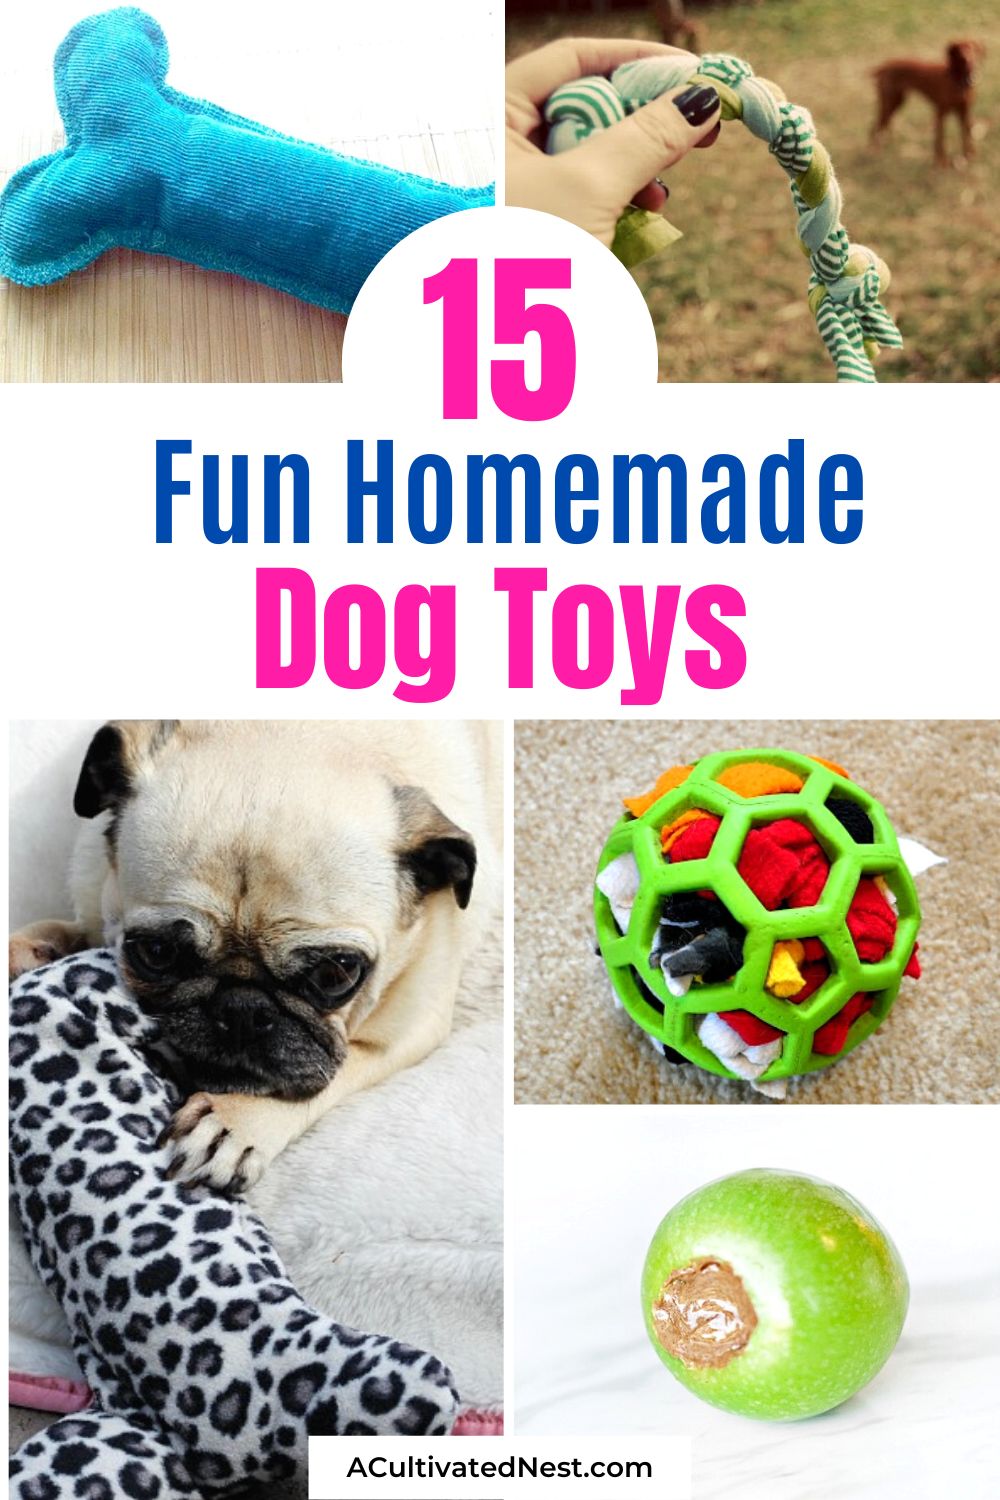 15 Homemade Dog Toys- If you have a dog, you don't need to spend tons of money on toys from pet stores. Instead, check out these fun homemade dog toys for craft ideas! | DIY dog toys to sew, how to make your own pet toys, #diyProjects #dogDIYs #homemadeDogToys #craftIdeas #ACultivatedNest